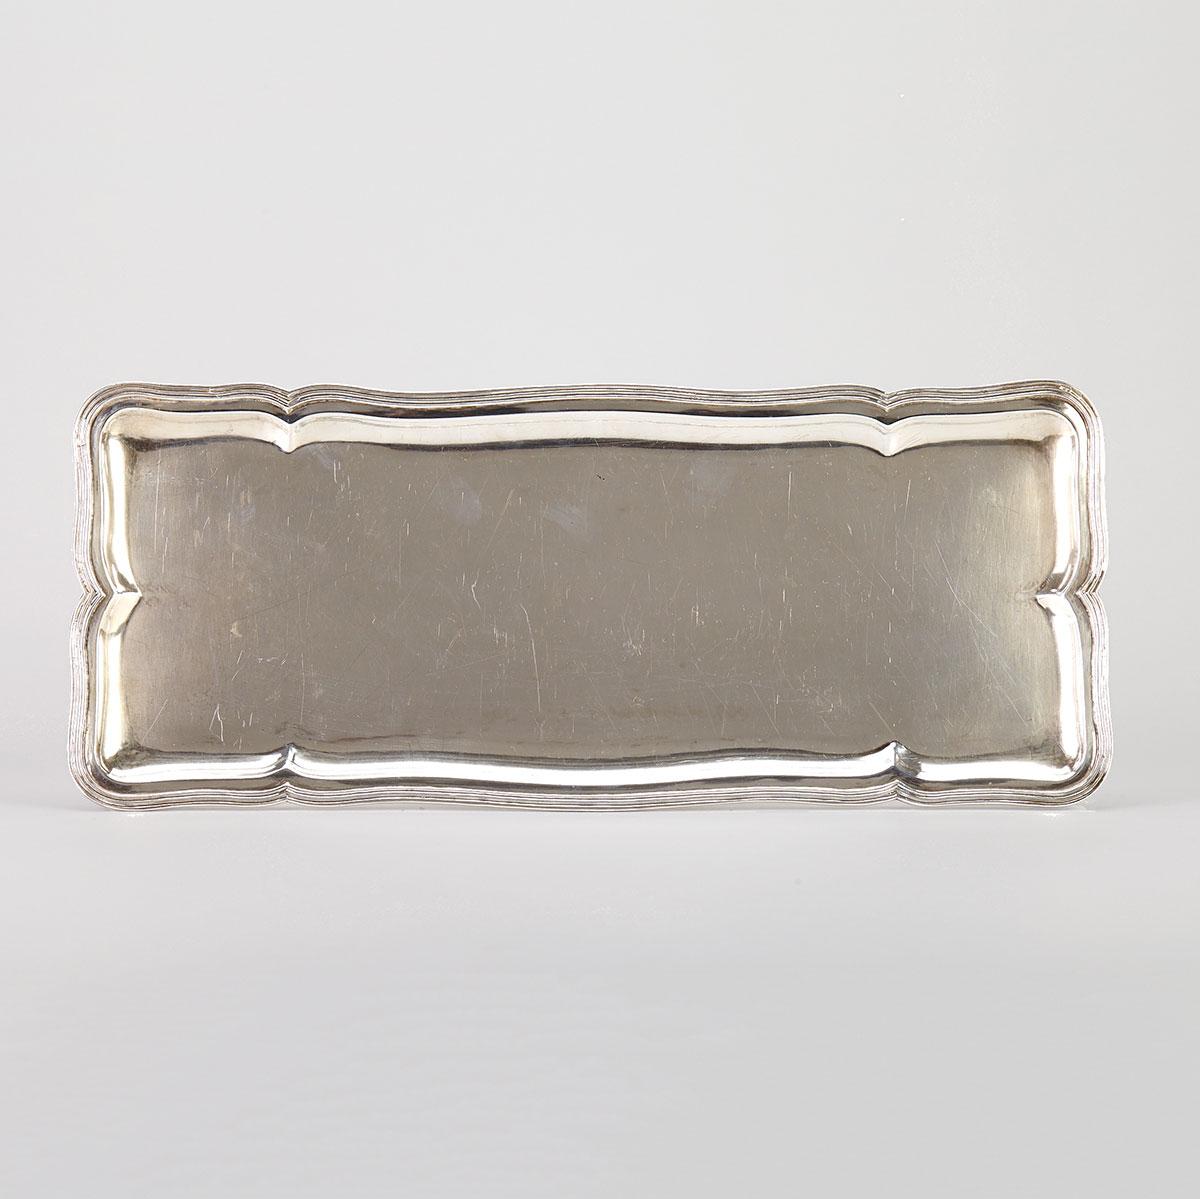 Columbian Silver Cocktail Tray, Bogota, mid-20th century